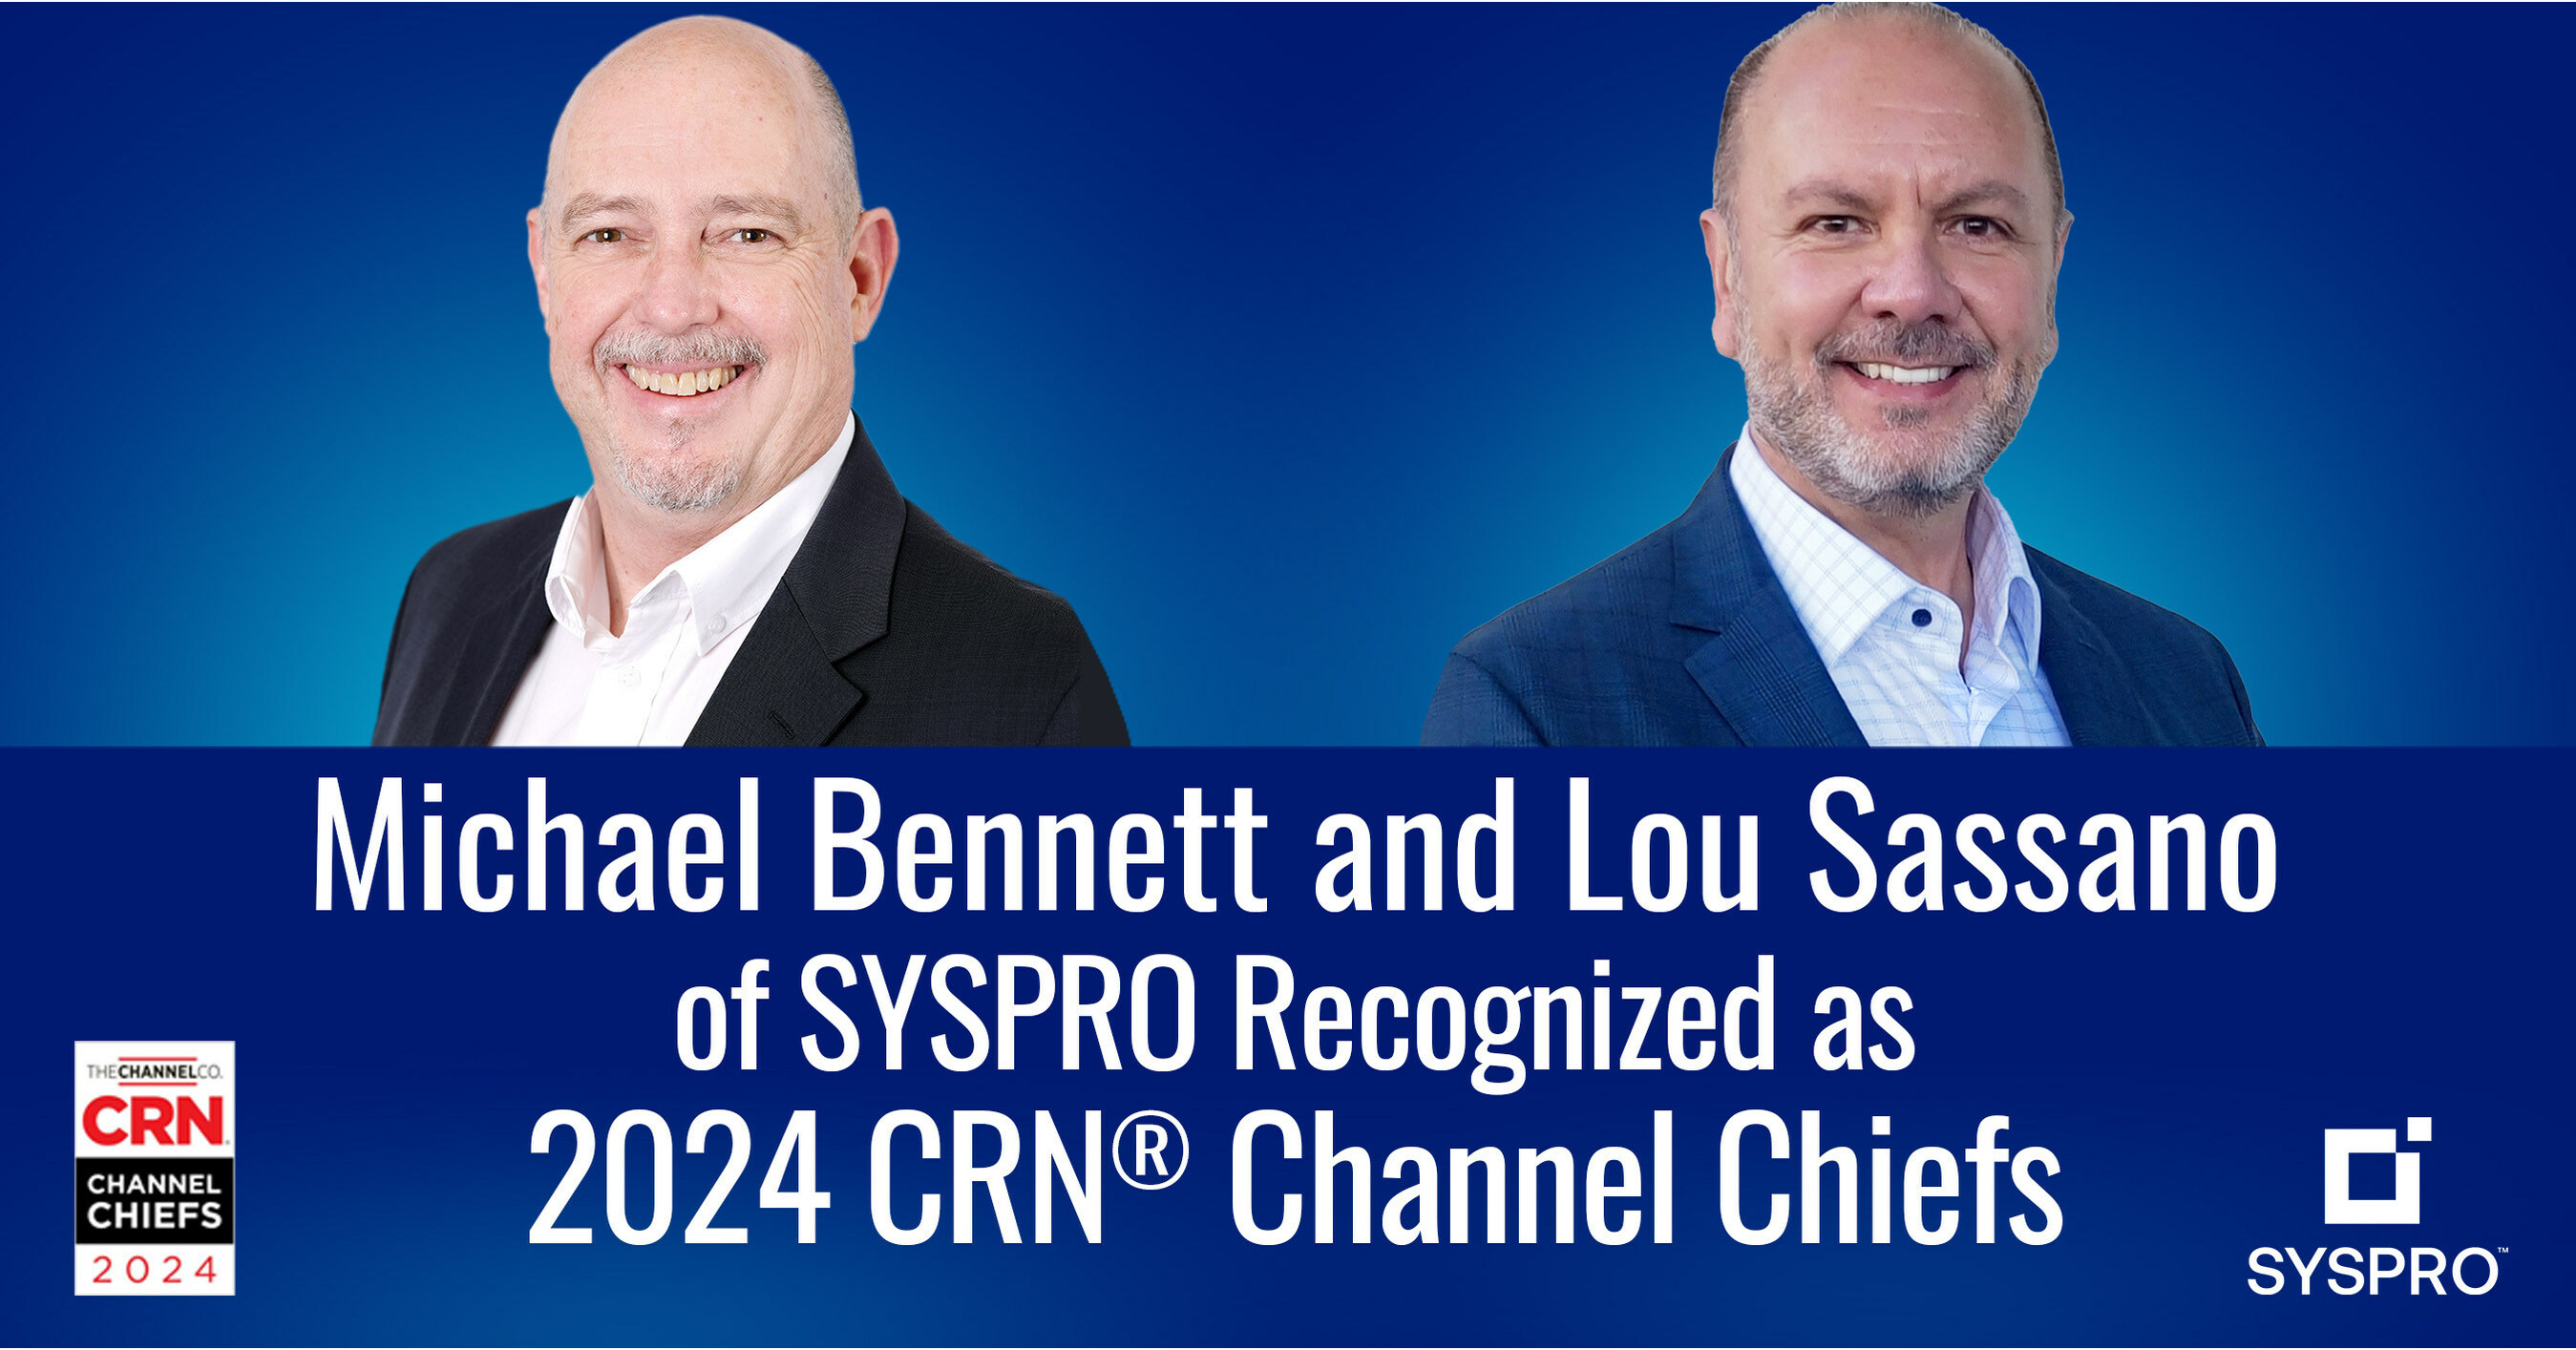 Michael and Lou Sassano of SYSPRO Recognized as 2024 CRN